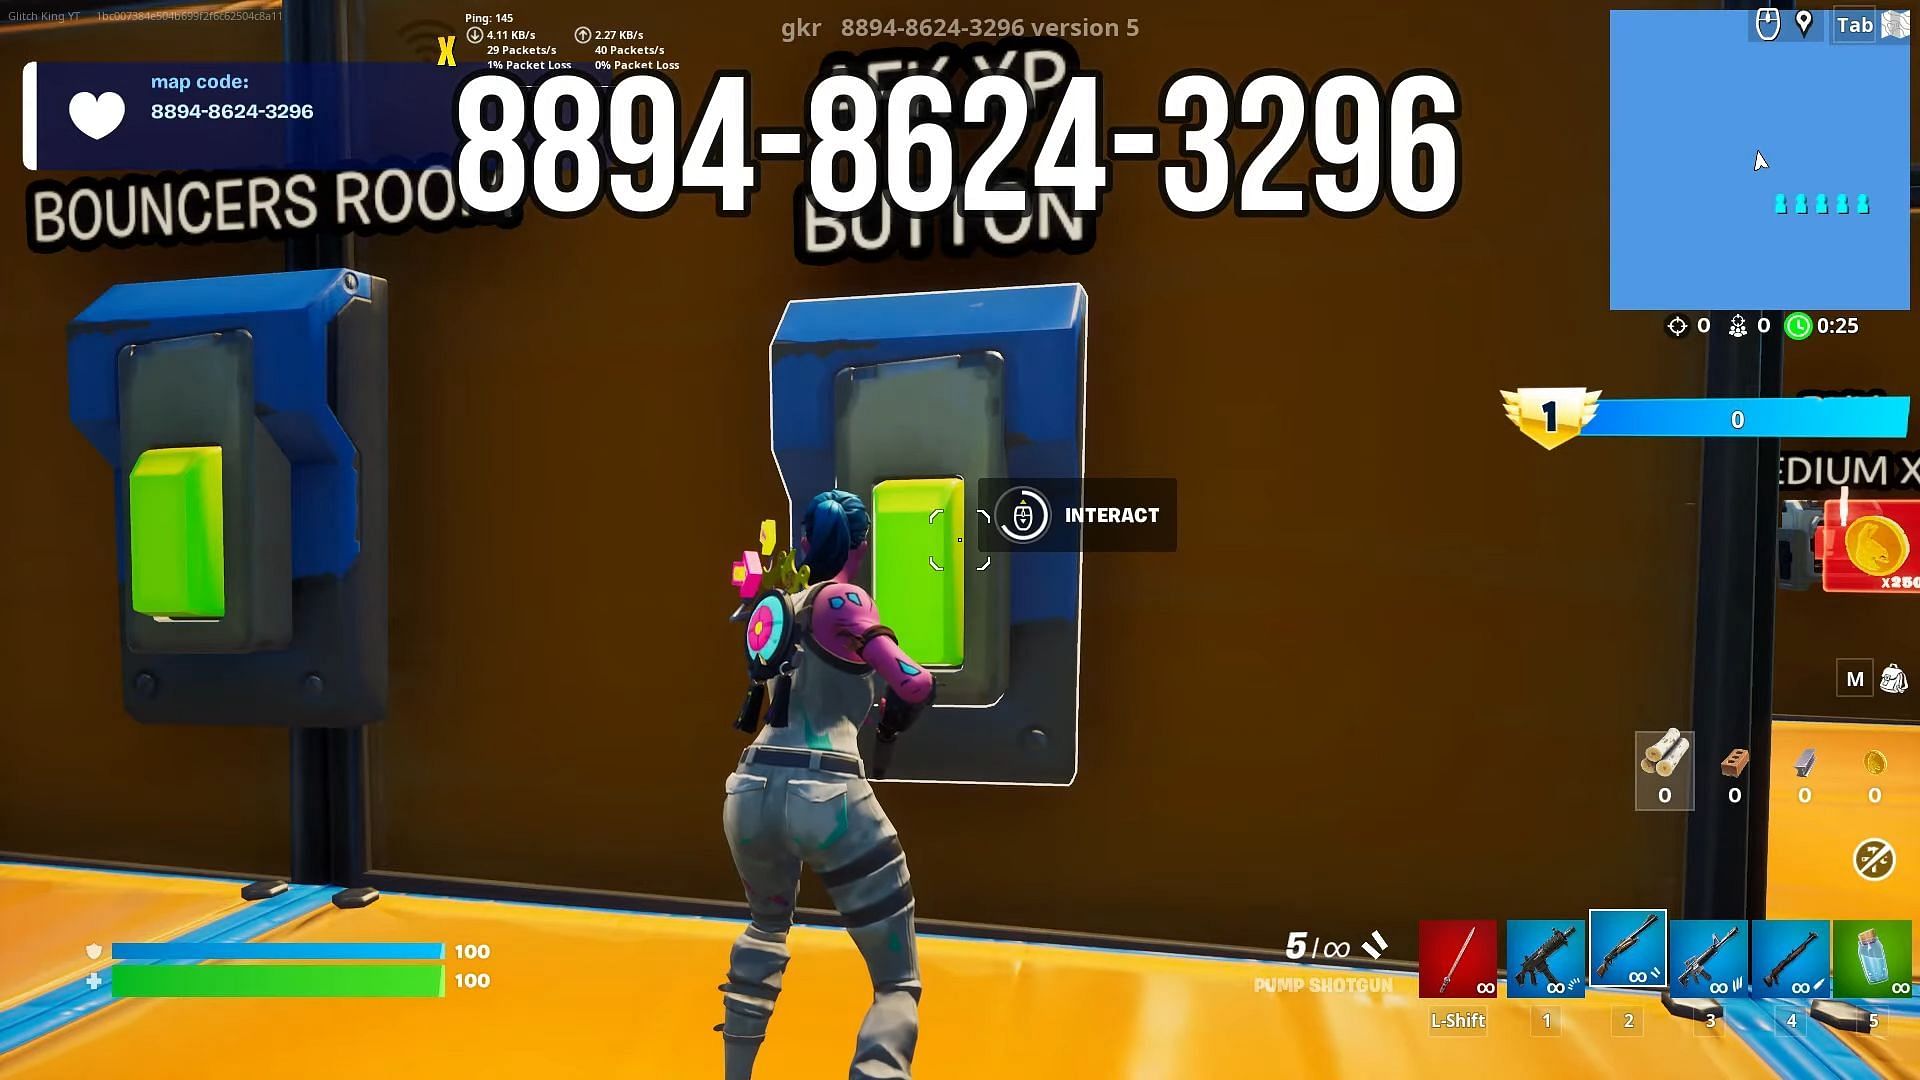 Use this amazing XP card to increase your Fortnite account levels (Image via GKK/YouTube screenshot).